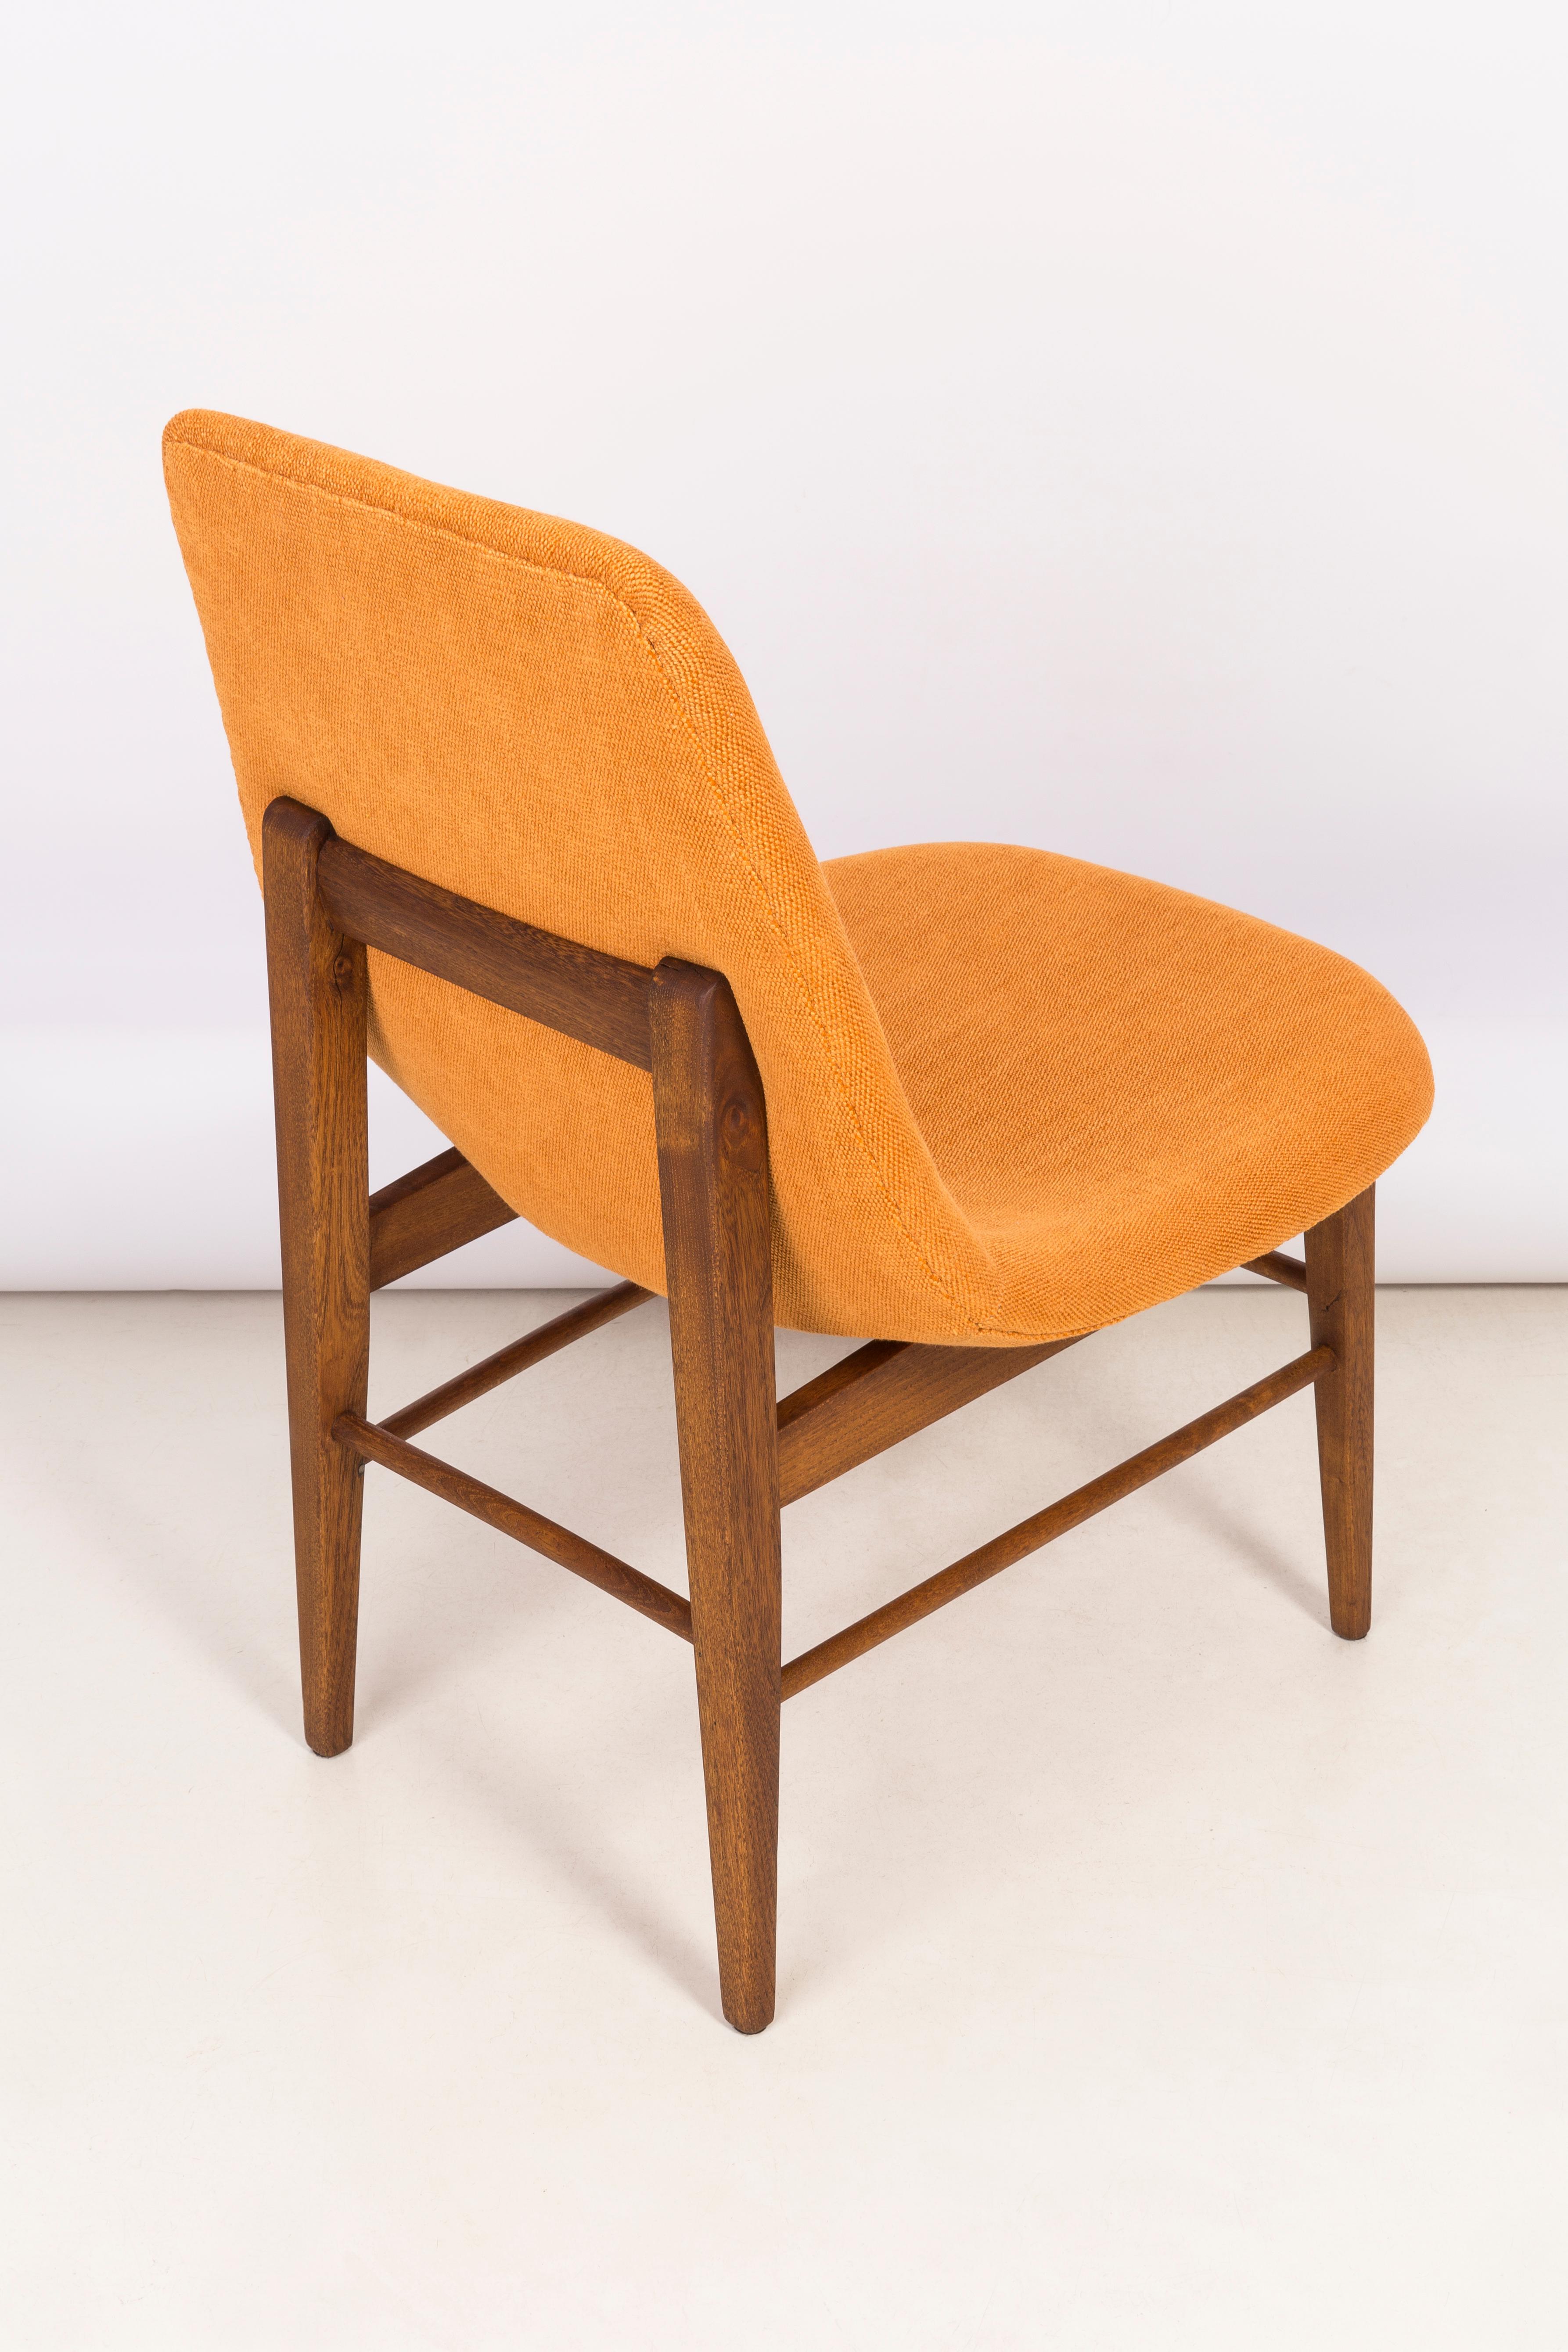 Hand-Crafted Rare 20th Century Orange Shell Chair, H.Lachert, 1960s For Sale